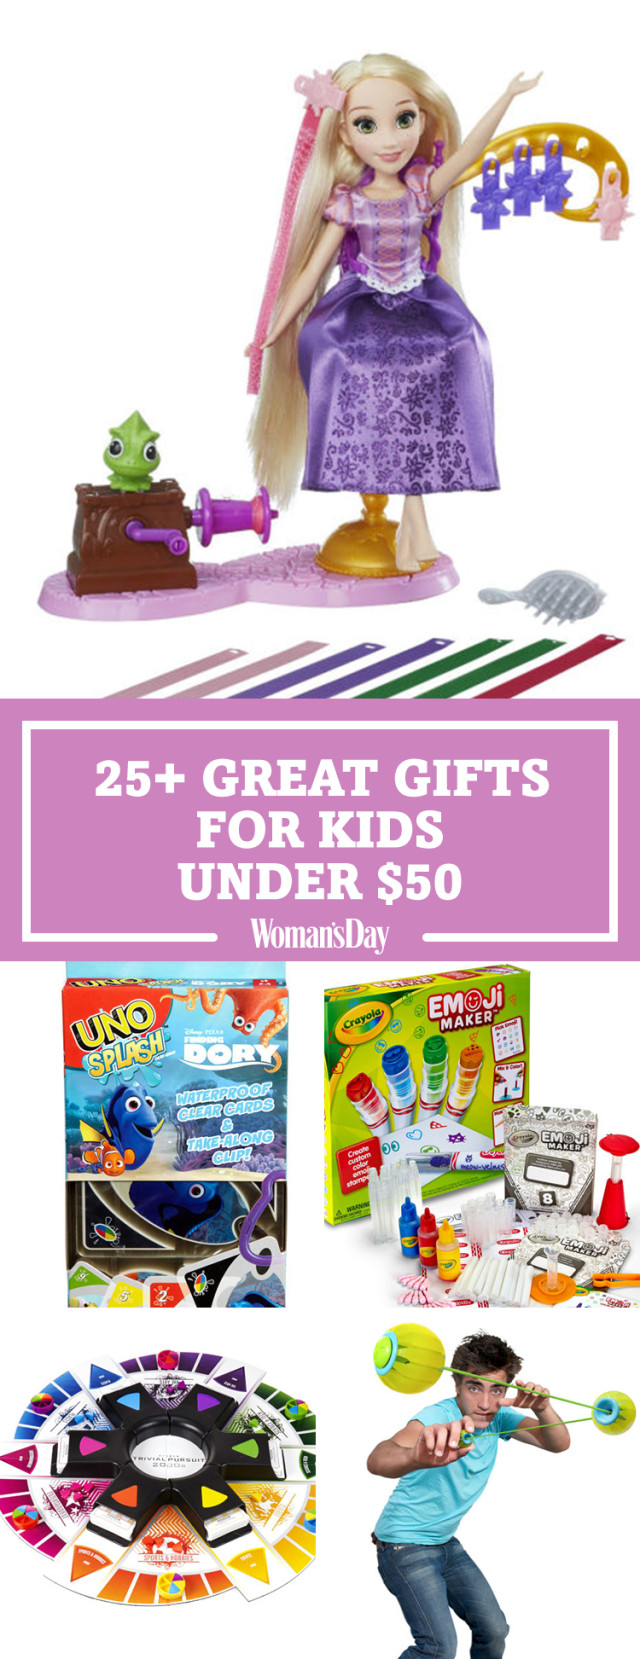 Good Gifts For Kids
 30 Best Christmas Gifts for Kids 2017 Holiday Gift Ideas